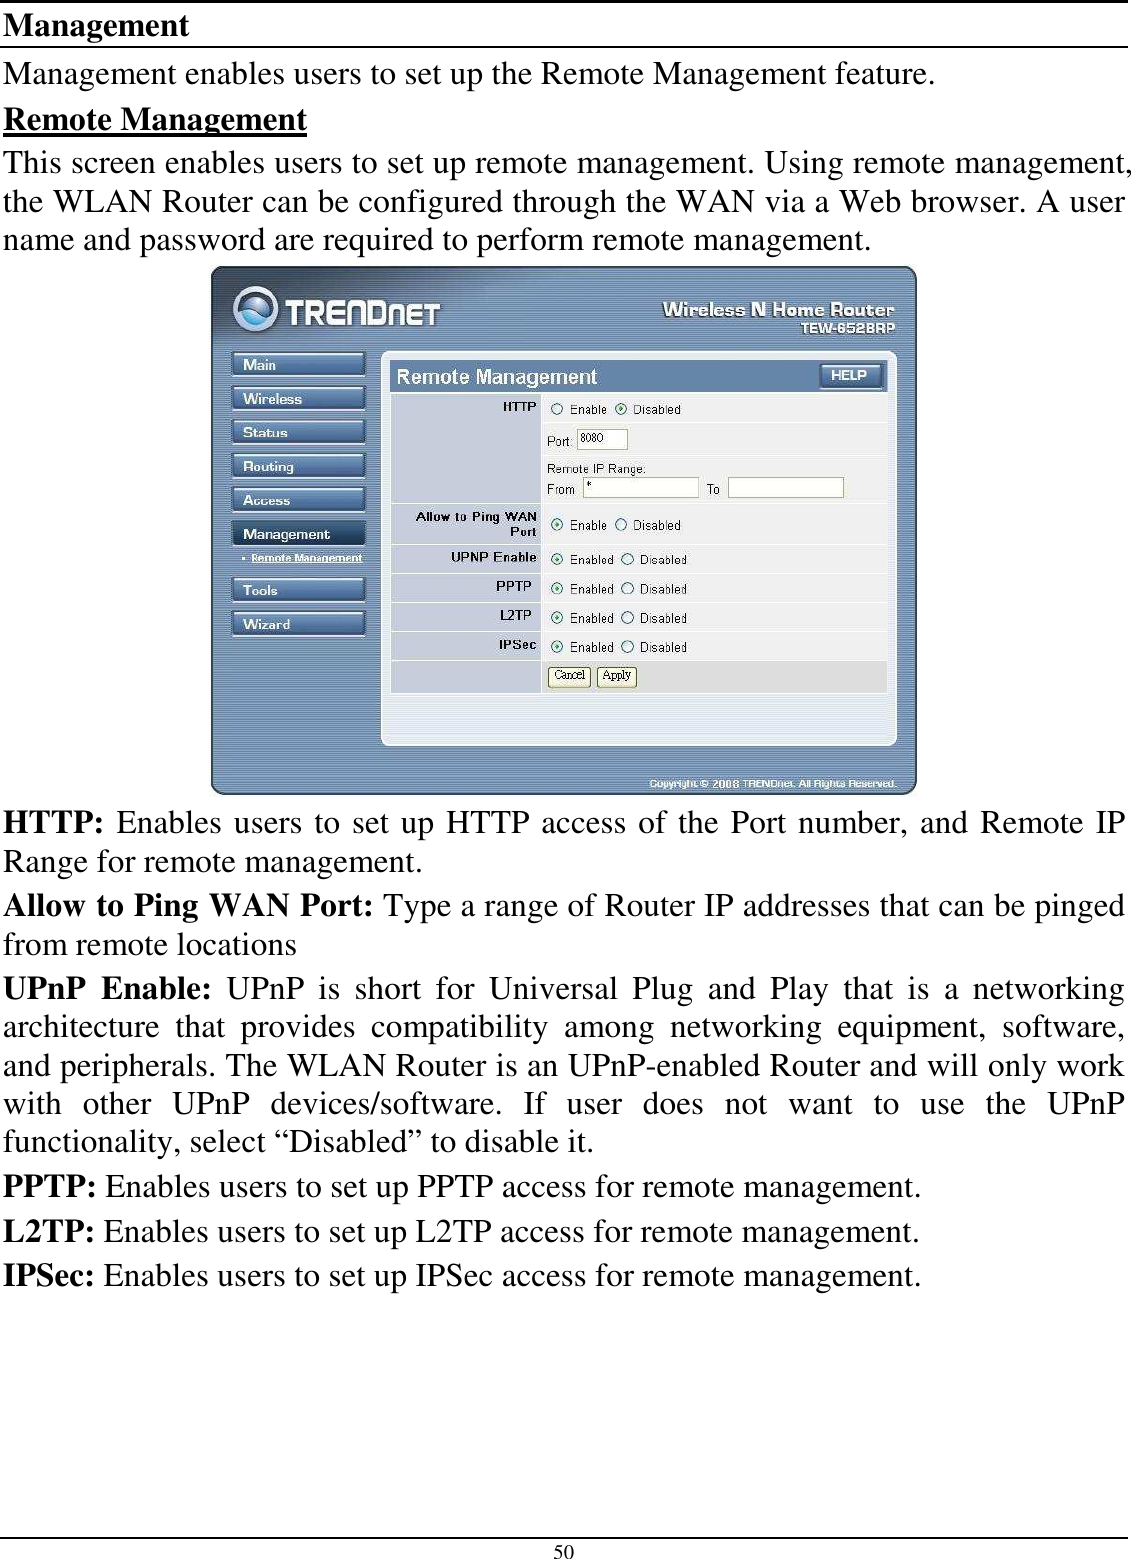 50 Management Management enables users to set up the Remote Management feature. Remote Management This screen enables users to set up remote management. Using remote management, the WLAN Router can be configured through the WAN via a Web browser. A user name and password are required to perform remote management.  HTTP: Enables users to set up HTTP access of the Port number, and Remote IP Range for remote management. Allow to Ping WAN Port: Type a range of Router IP addresses that can be pinged from remote locations UPnP  Enable:  UPnP  is  short  for  Universal  Plug  and  Play  that  is  a  networking architecture  that  provides  compatibility  among  networking  equipment,  software, and peripherals. The WLAN Router is an UPnP-enabled Router and will only work with  other  UPnP  devices/software.  If  user  does  not  want  to  use  the  UPnP functionality, select “Disabled” to disable it. PPTP: Enables users to set up PPTP access for remote management. L2TP: Enables users to set up L2TP access for remote management. IPSec: Enables users to set up IPSec access for remote management. 